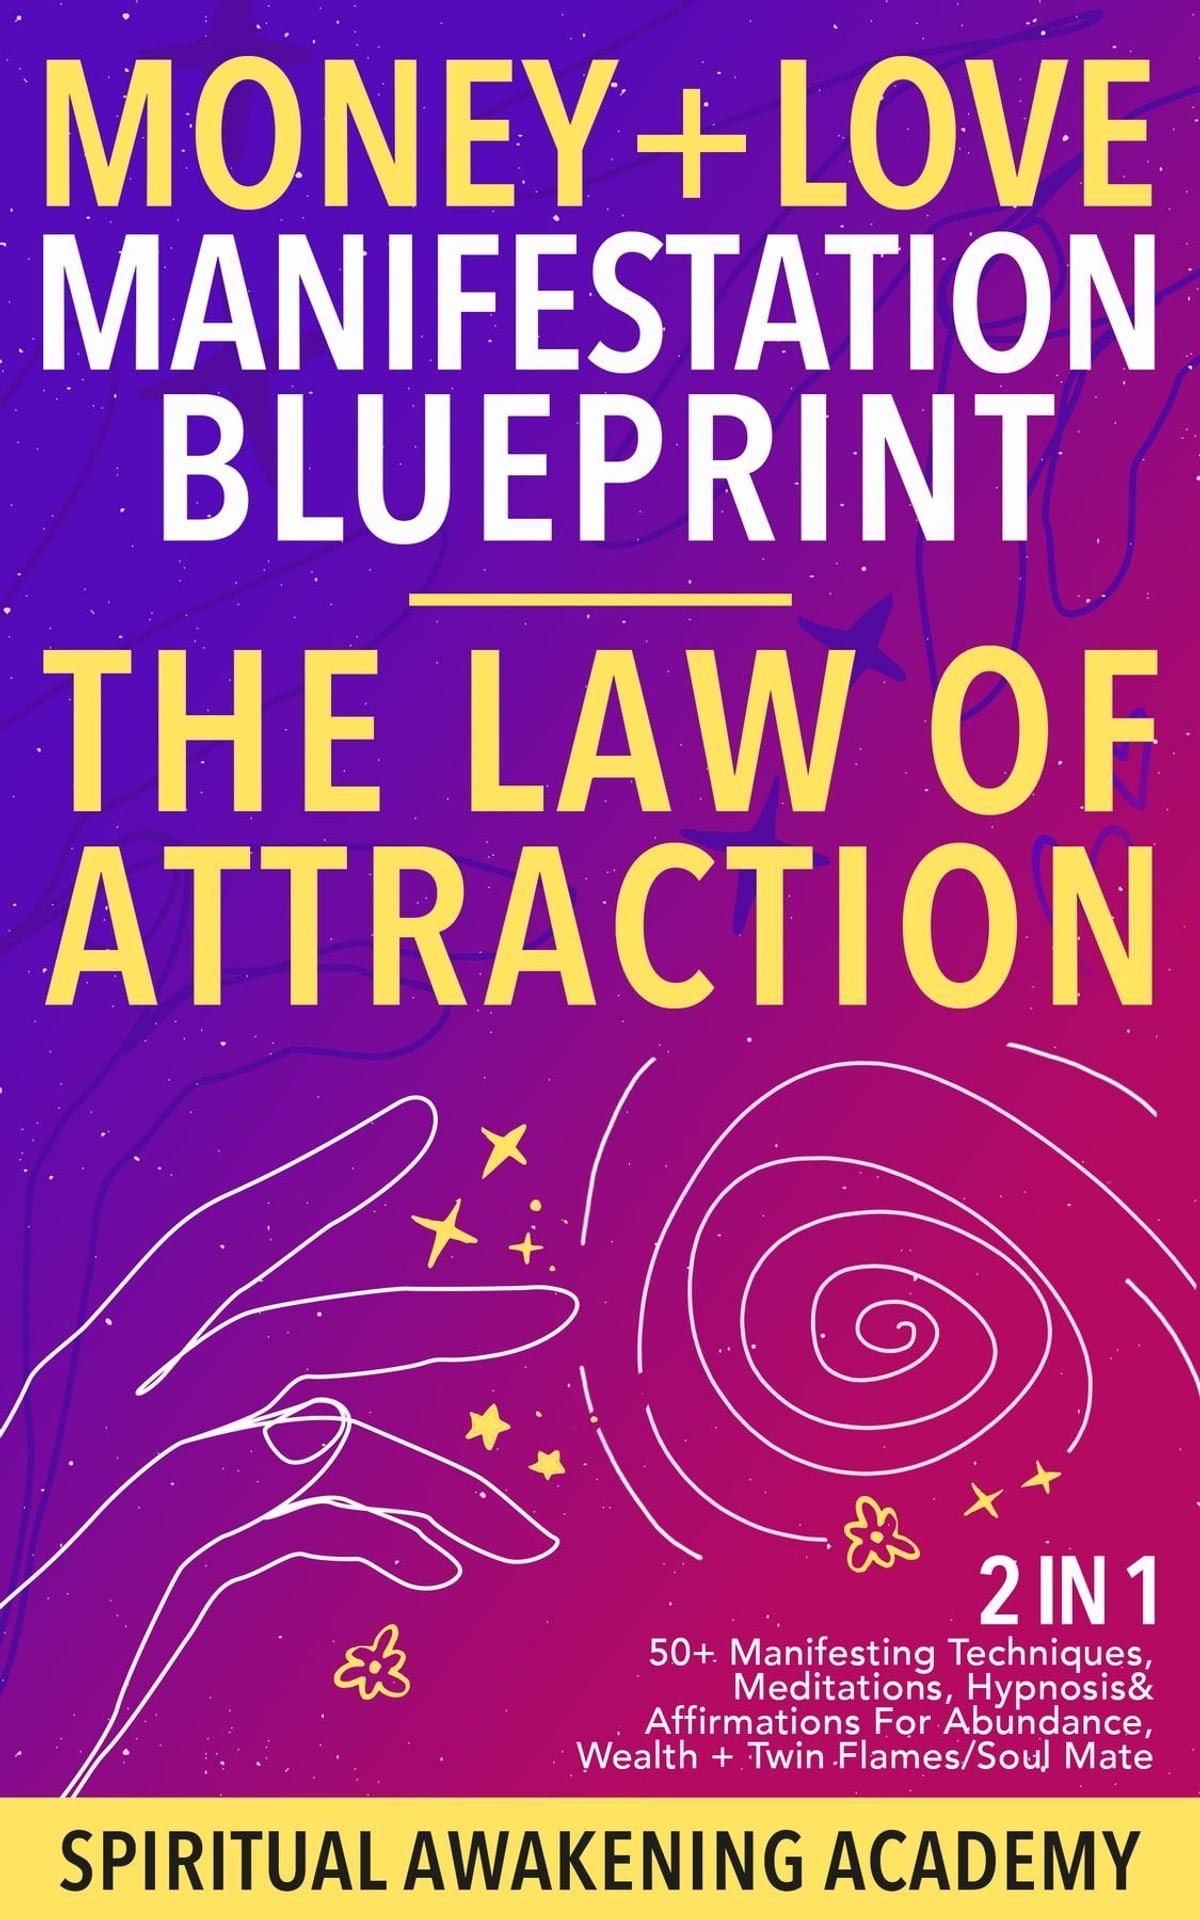 Money + Love Manifestation Blueprint- The Law Of Attraction (2 in 1): 50+ Manifesting Techniques, Meditations, Hypnosis& Affirmations For Abundance, Wealth+ Twin Flames/ Soul Mate